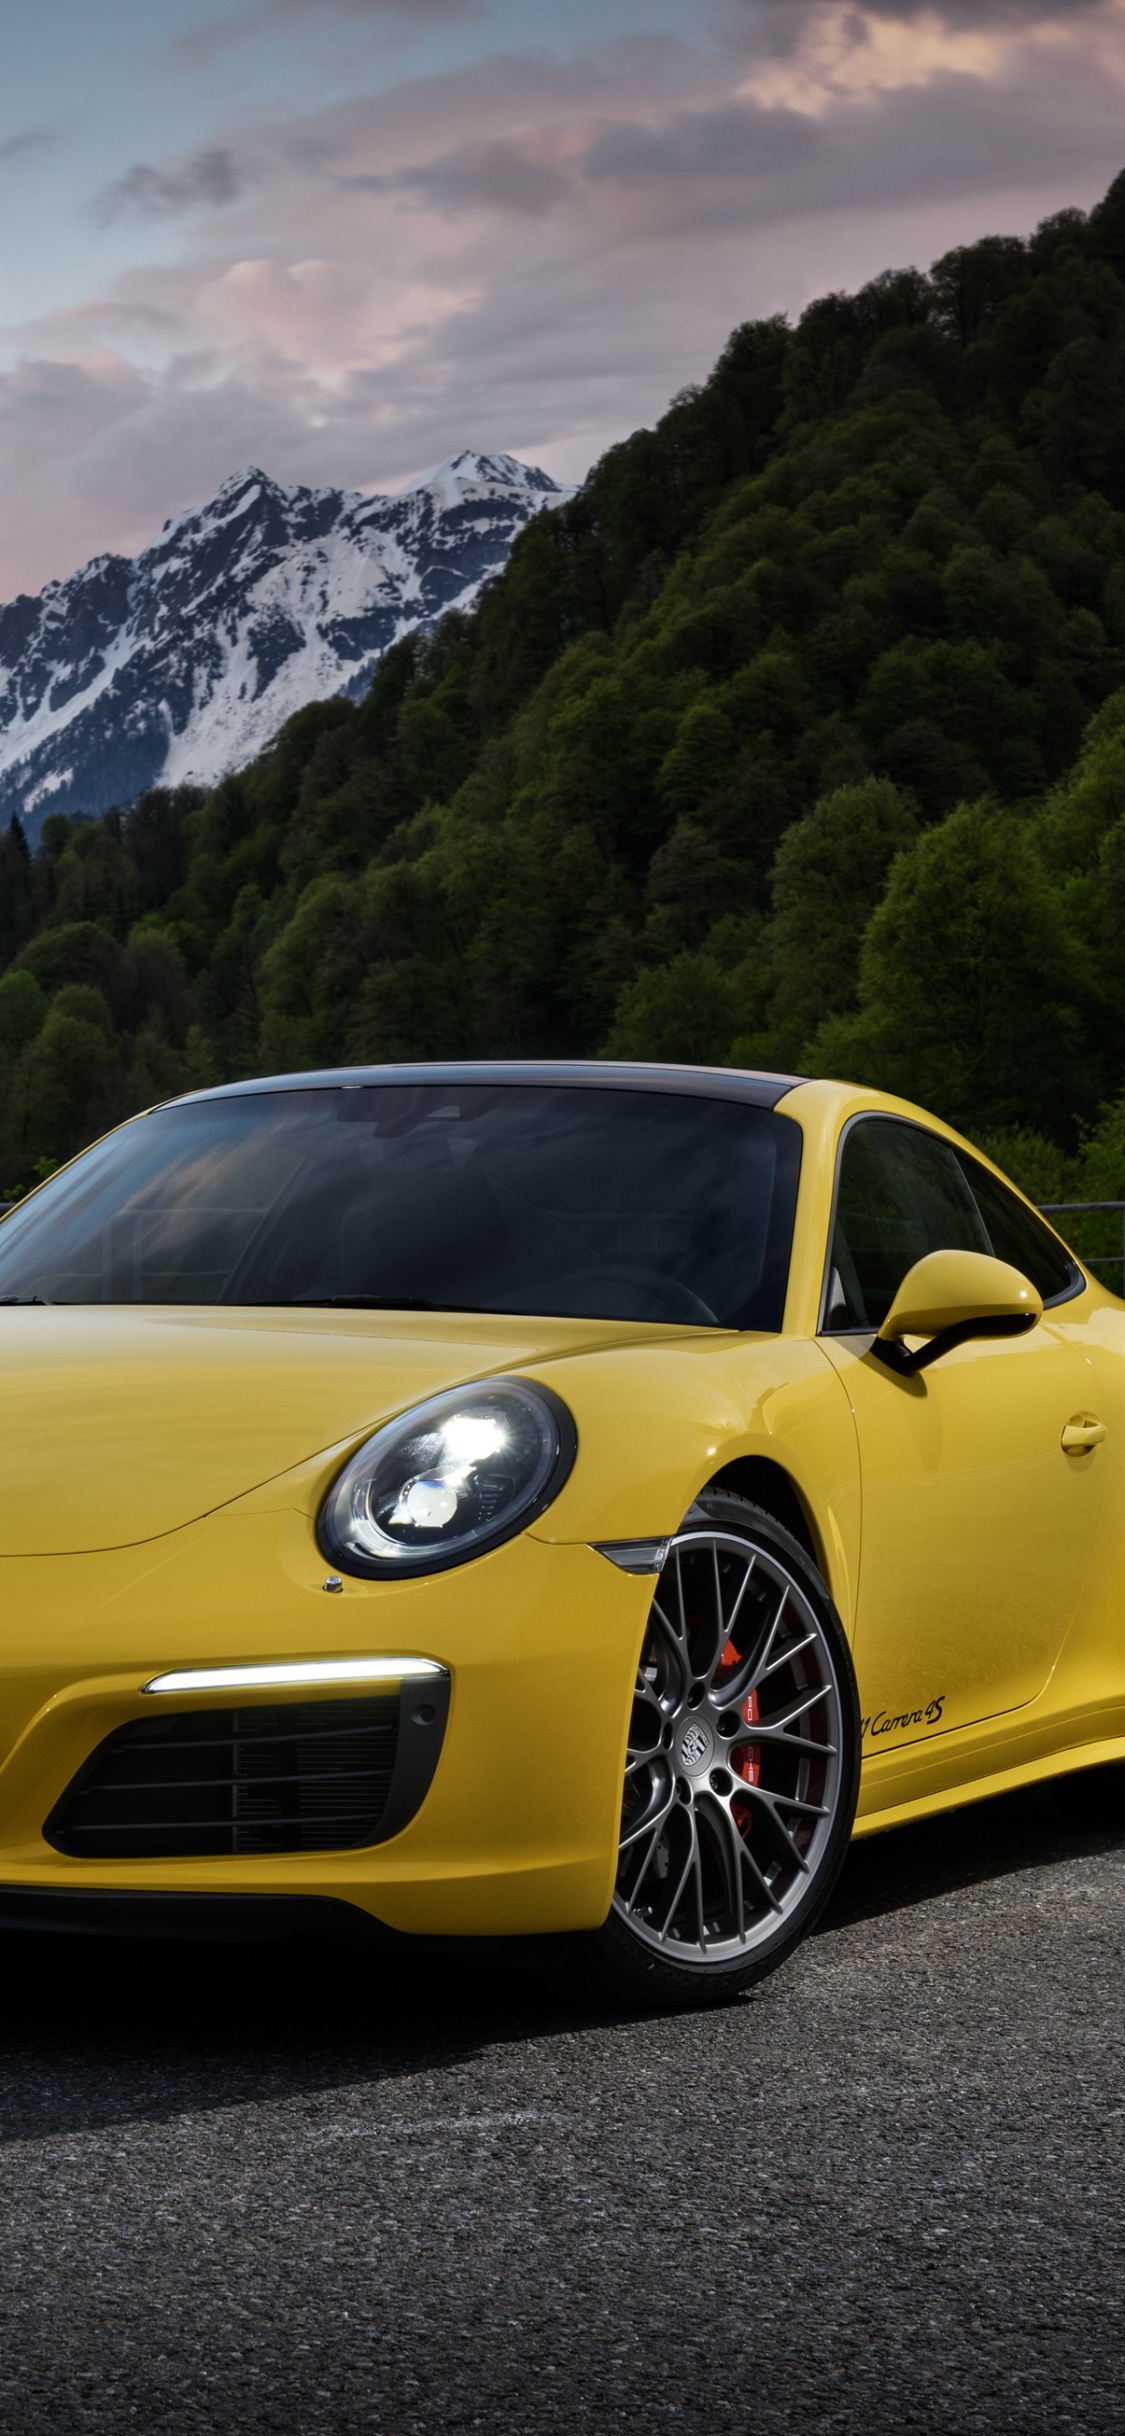 Yellow Porsche 911 on Road Near Mountain During Daytime. Wallpaper in 1125x2436 Resolution